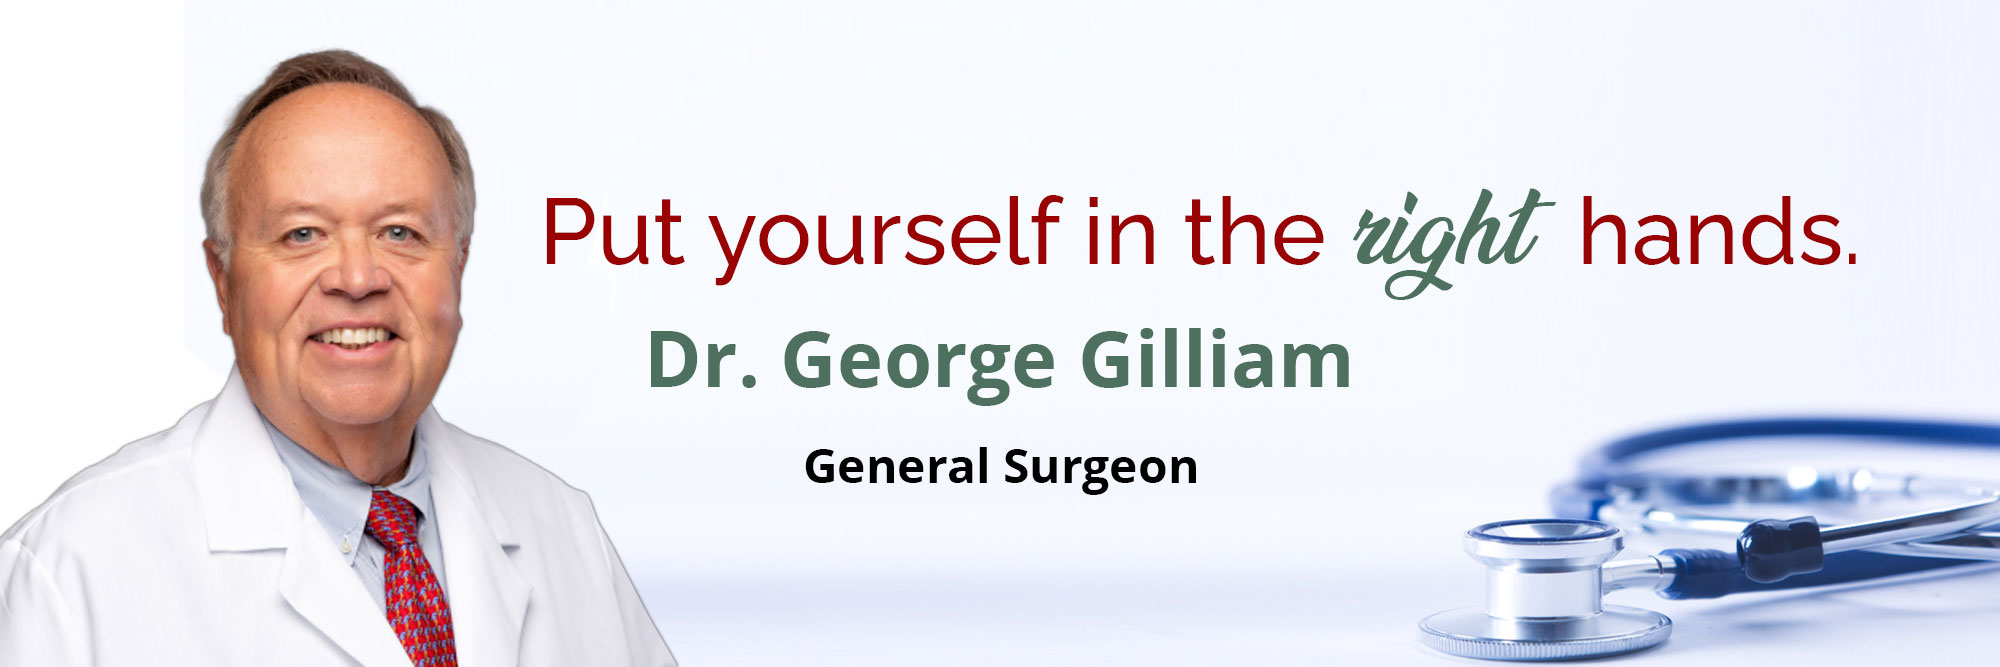 Put yourself in the right hands. 

Dr. George Gilliam 

General Surgeon